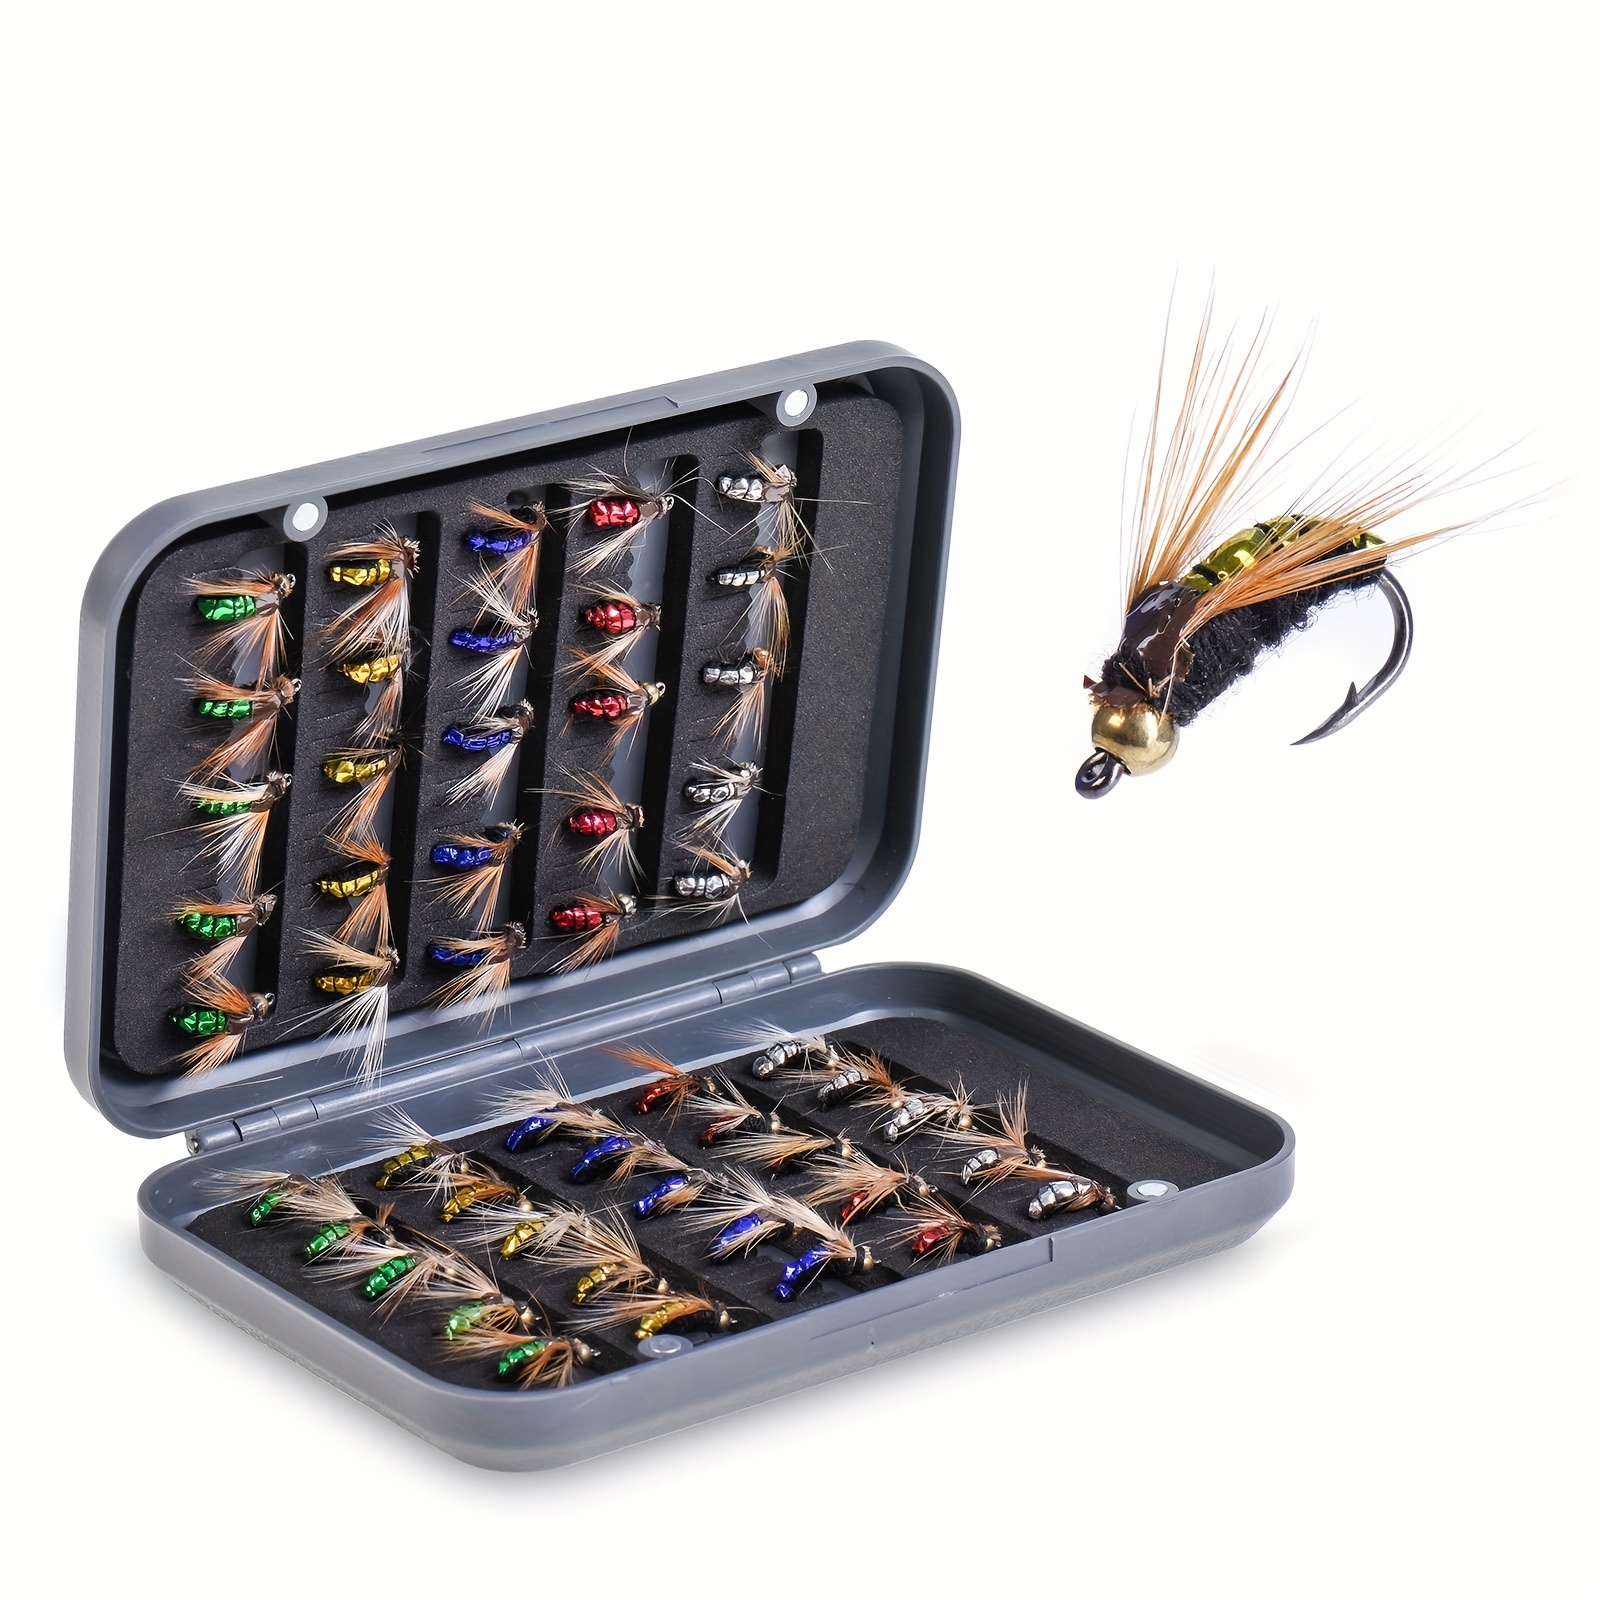 Fly Fishing Flies Kit, 24-114pcs Handmade Fly Fishing Gear With Dry/wet  Flies, Streamers, Fly Assortment Trout Bass Fishing With Fly Box